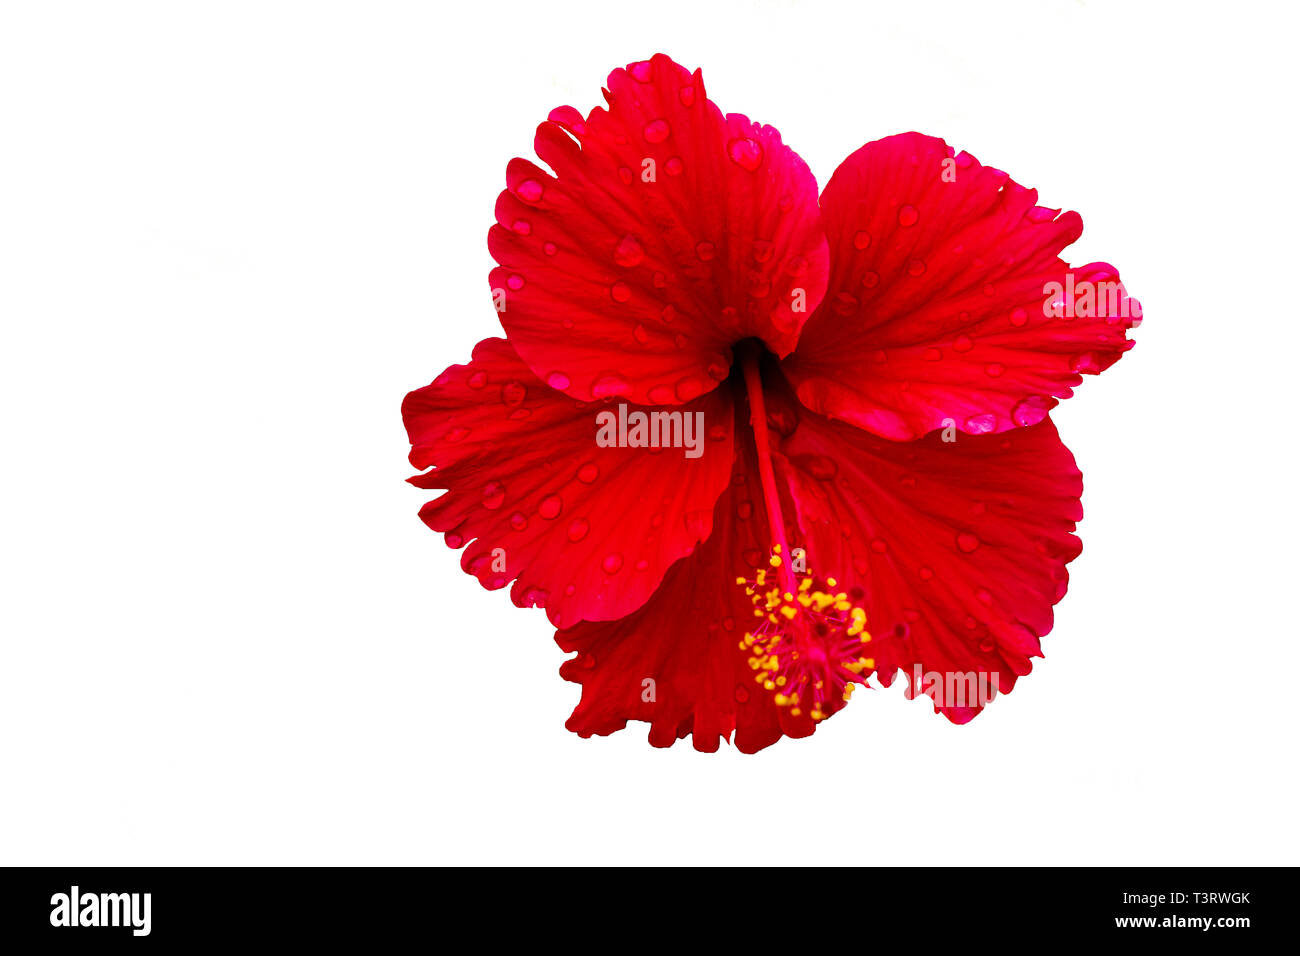 hibiscus flower on a white background Stock Photo